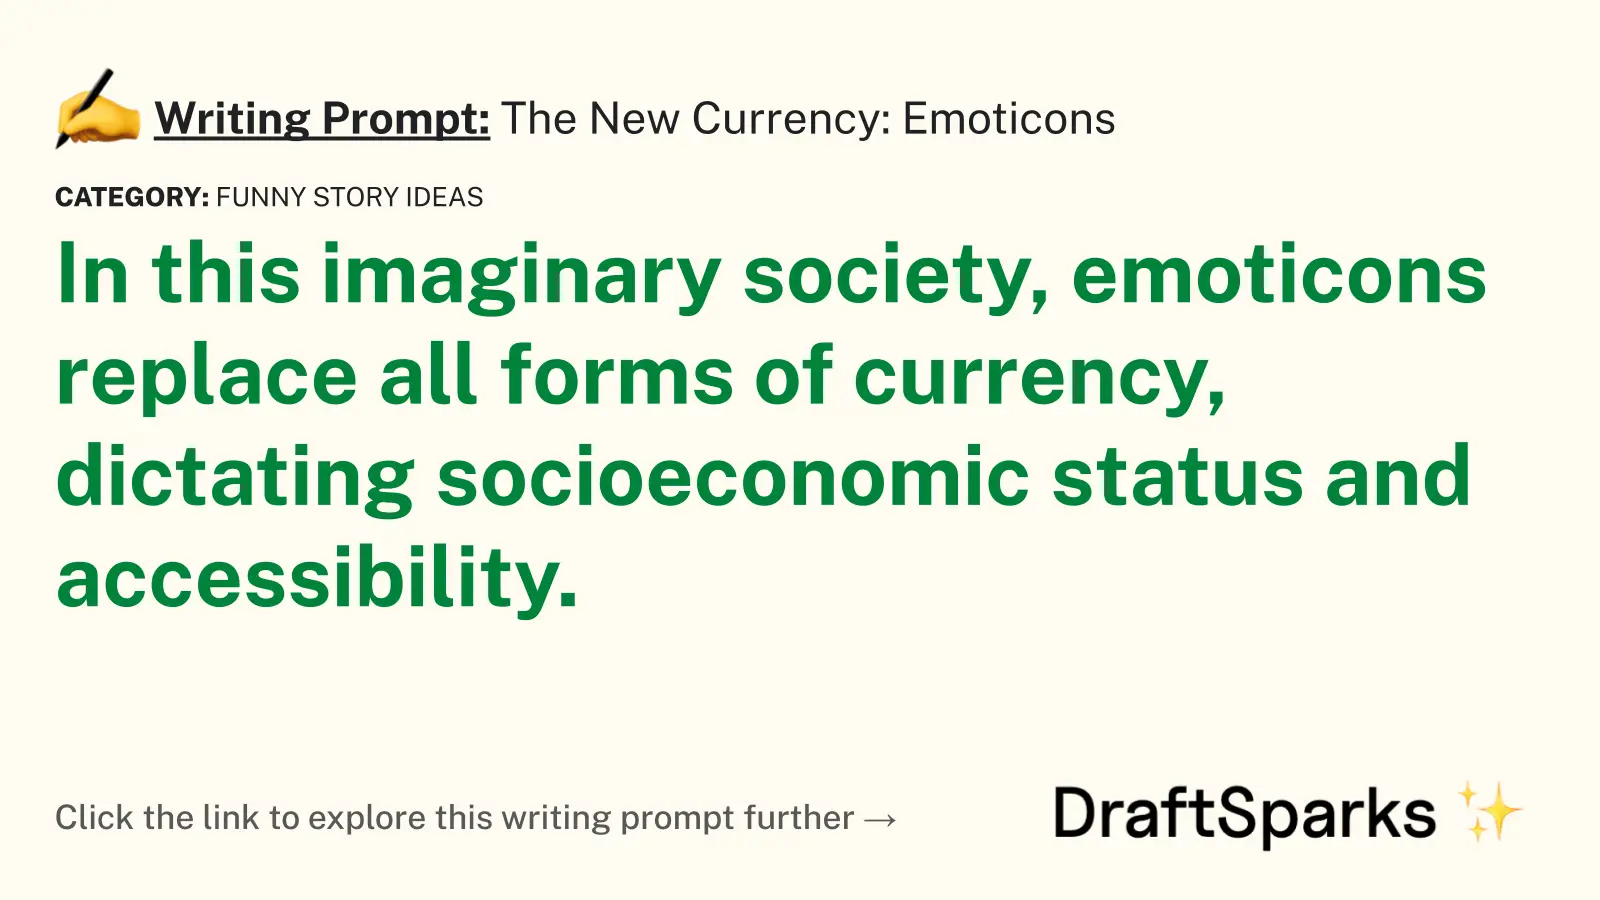 The New Currency: Emoticons